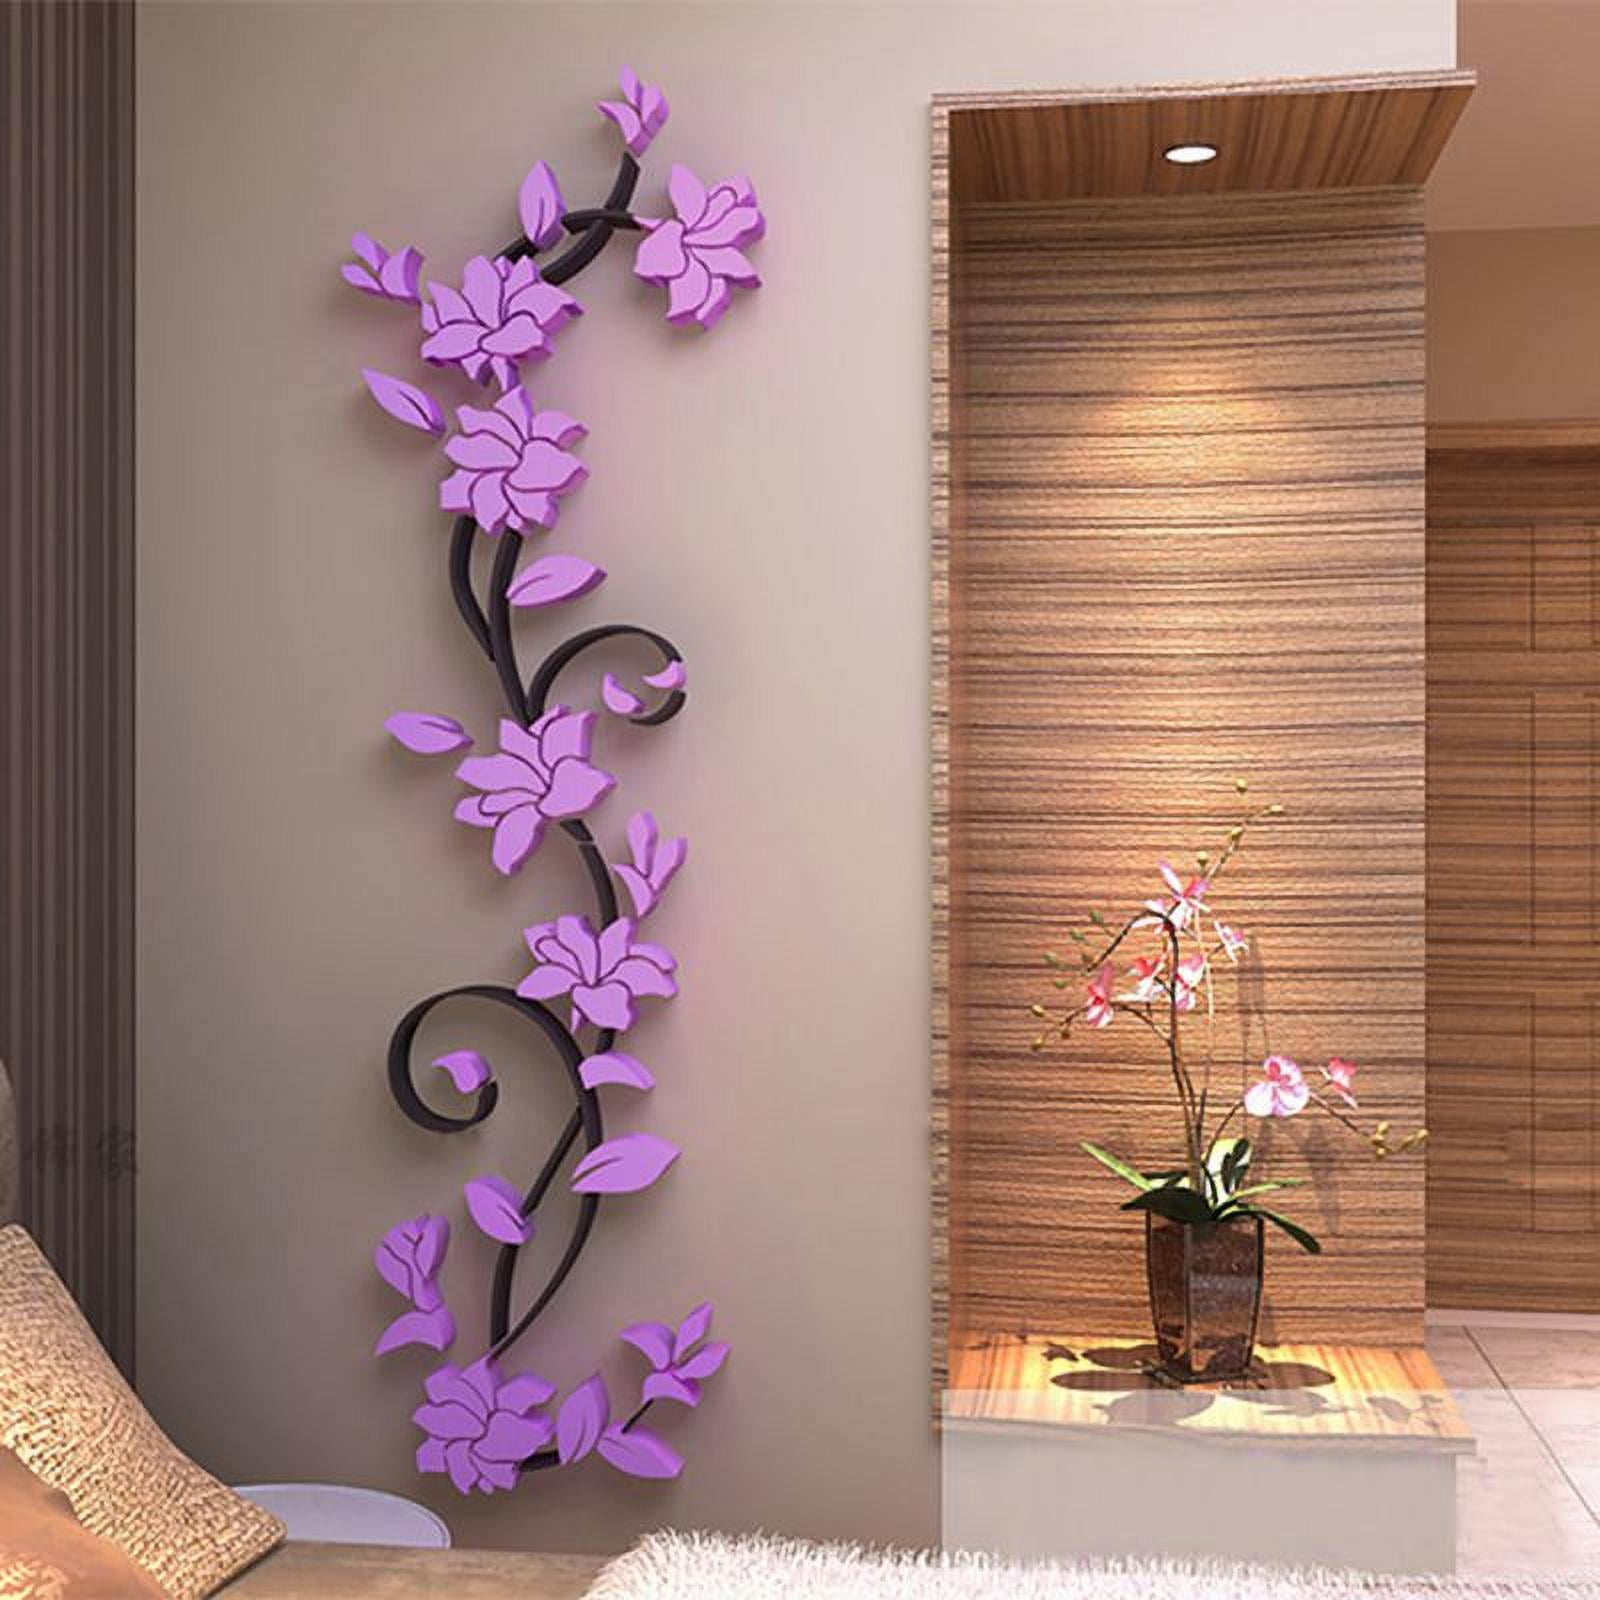 3D Watercolor Floral Wallpaper Wall Mural Removable Self-adhesive Sticker 44